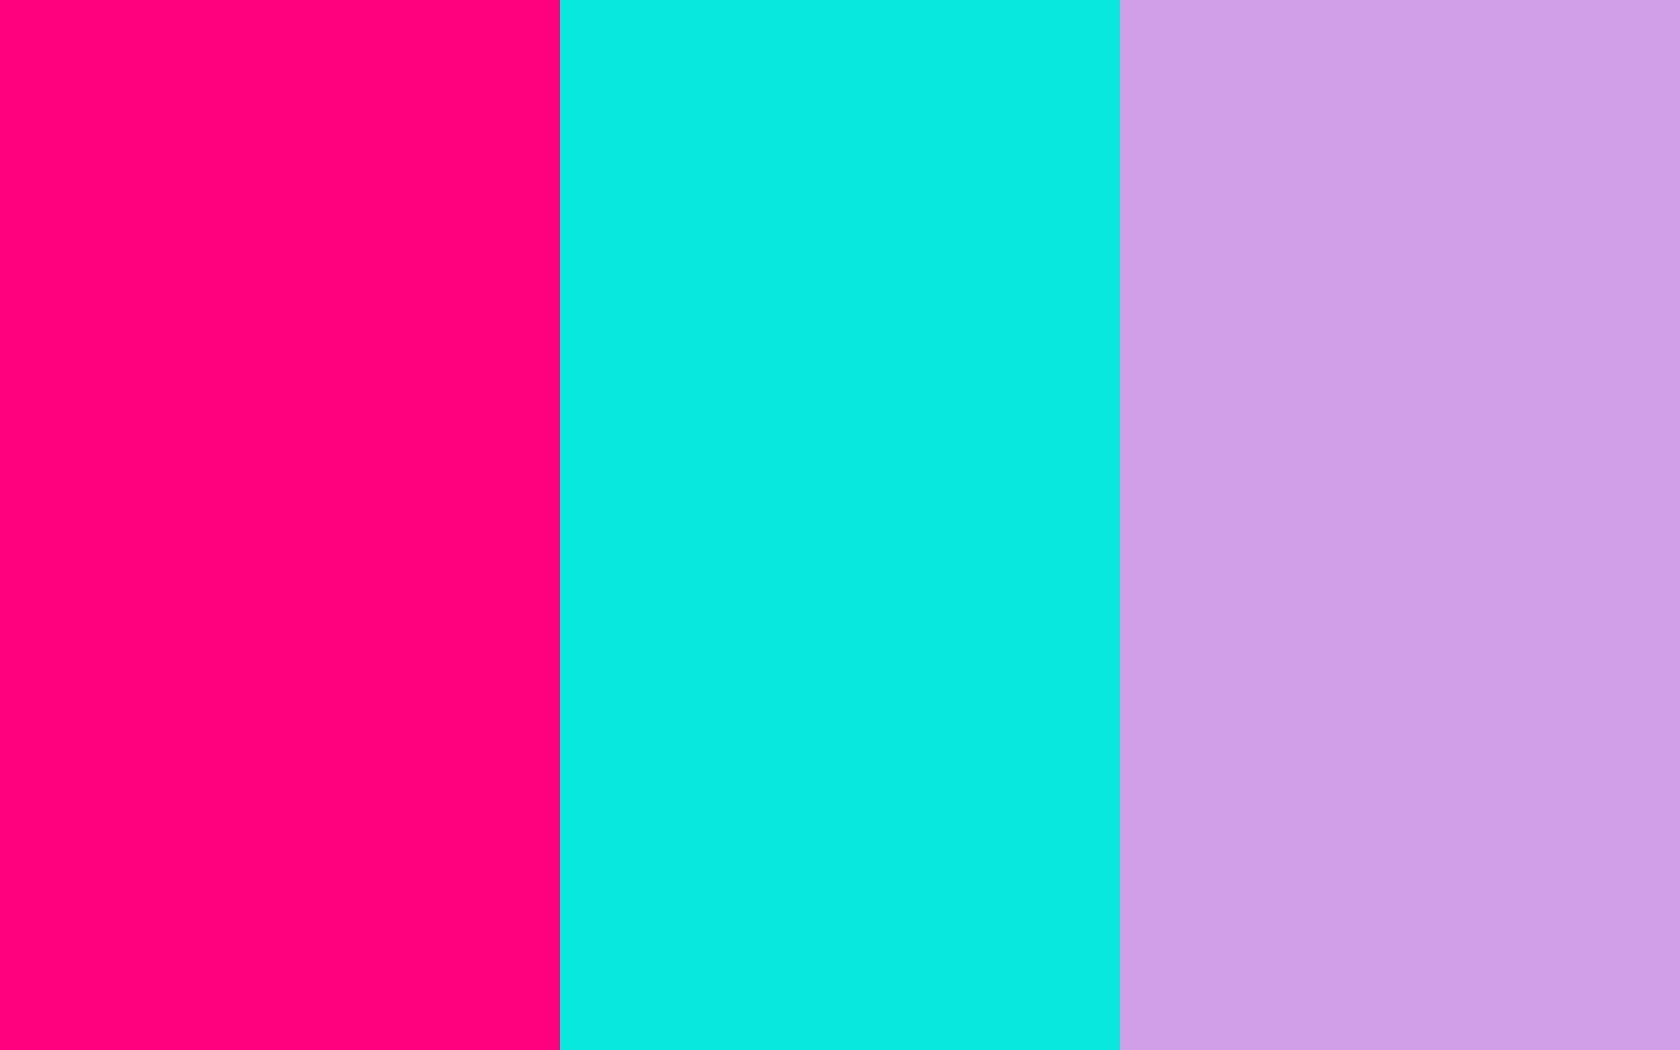 Free 1680x1050 resolution Bright Pink, Bright Turquoise and Bright